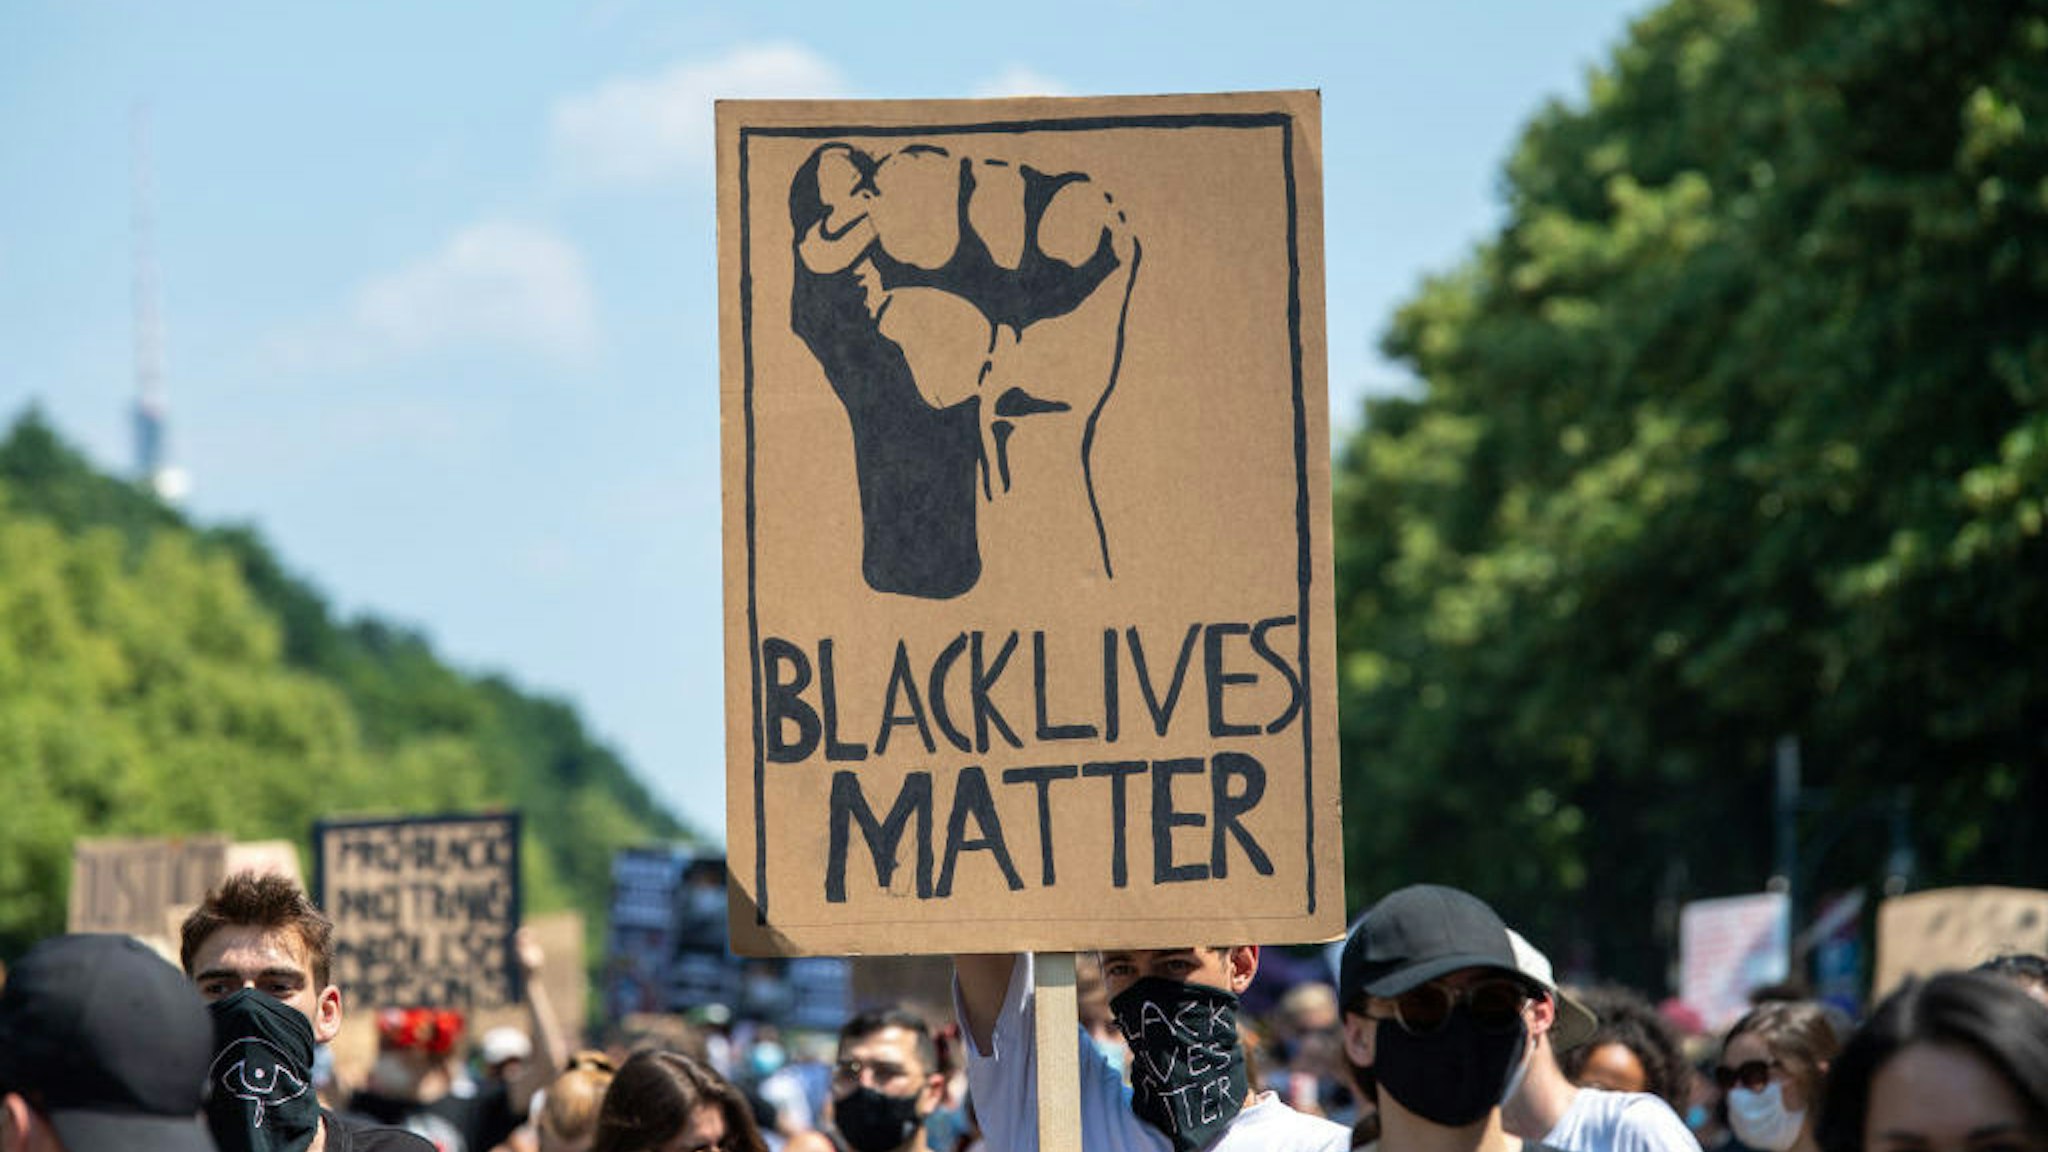 27 June 2020, Berlin: During a "Black Lives Matter" demonstration at the Victory Column, a participant holds a poster with the words "Black Lives Matter". More than 1000 people demonstrated against racism on the Street of June 17. Photo: Christophe Gateau/dpa (Photo by Christophe Gateau/picture alliance via Getty Images)